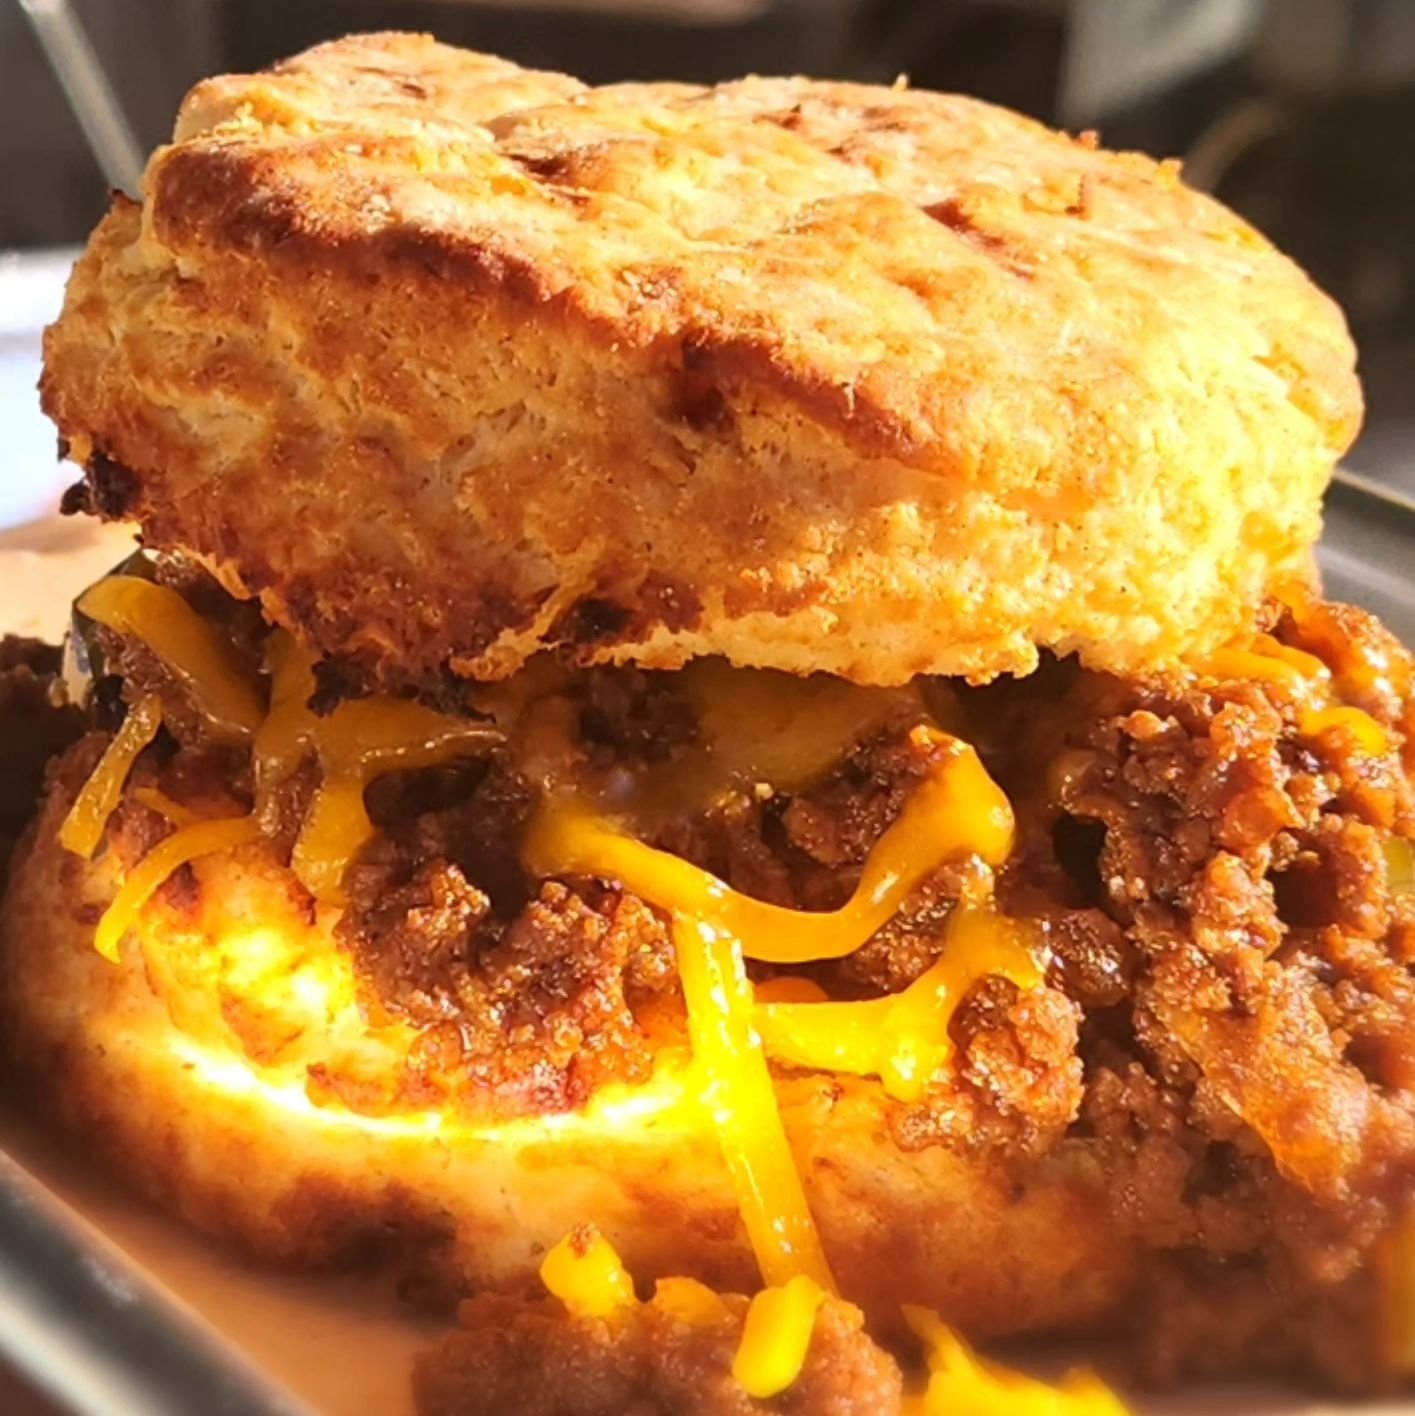 Today, we have Sloppy Joe with a sweet BBQ sauce and cheddar!!

#sloppyjoe #biscuits #EGAD #spacecoastfoodies #brunch #melbournefl #melbournefoodie #breakfast